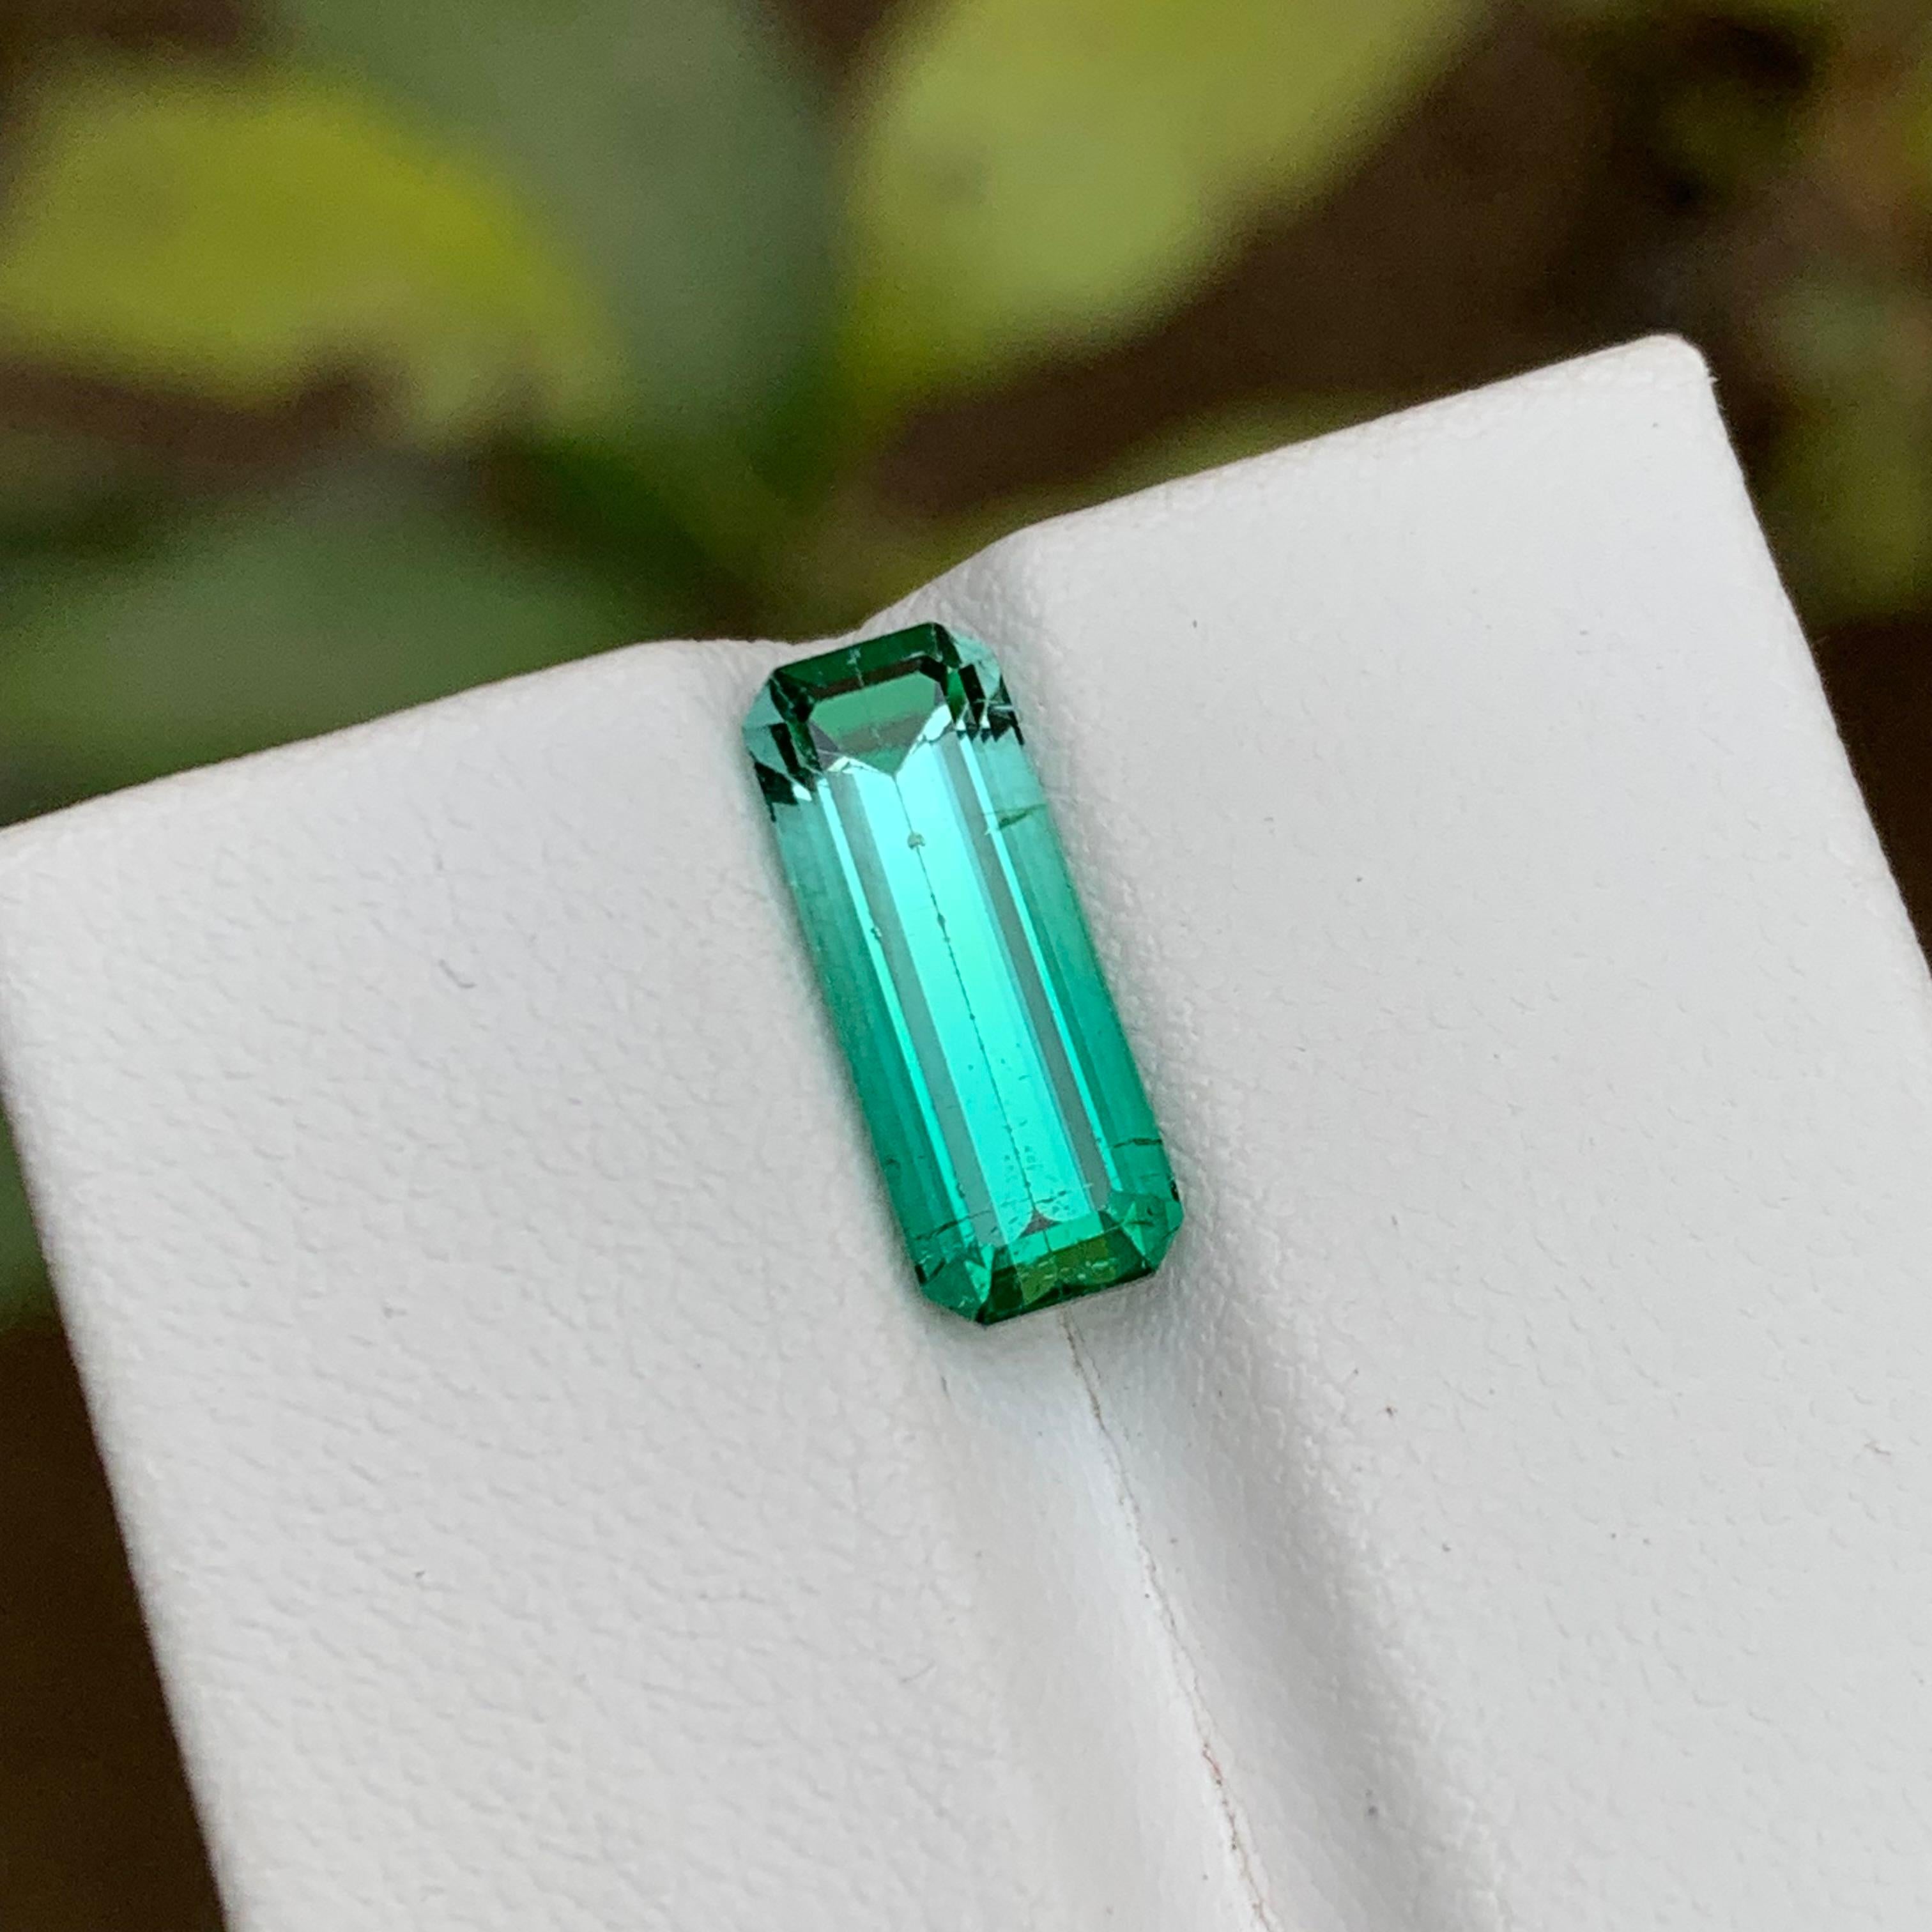 GEMSTONE TYPE: Tourmaline
PIECE(S): 1
WEIGHT: 3.25 Carats
SHAPE: Step Emerald
SIZE (MM):  13.62 x 5.25 x 5.01
COLOR: Neon Bluish Green Bicolor
CLARITY: Approx 90% Eye Clean
TREATMENT: None
ORIGIN: Afghanistan
CERTIFICATE: On demand

This dazzling